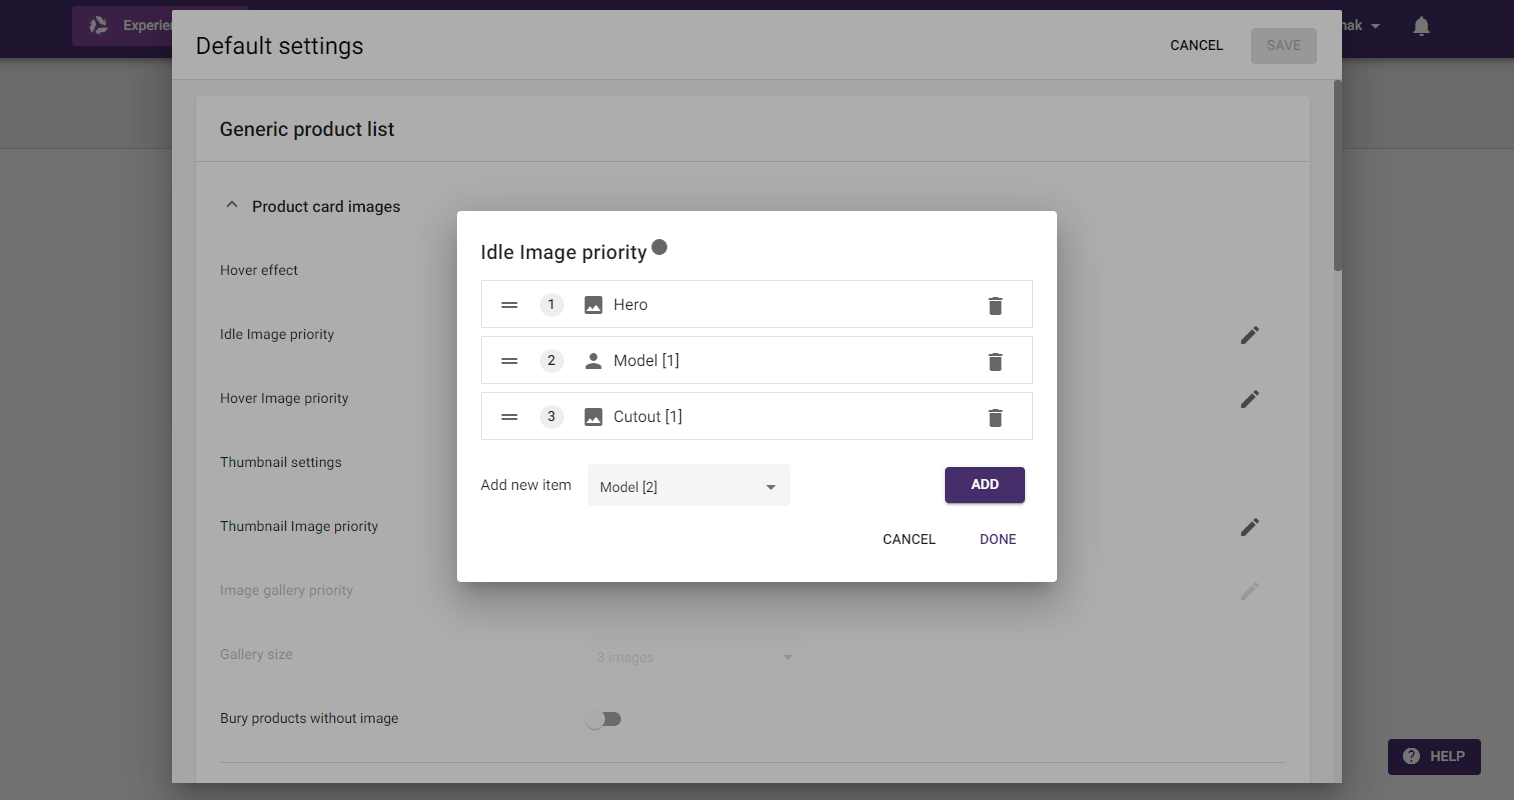 Experience app setting of image type prioritization